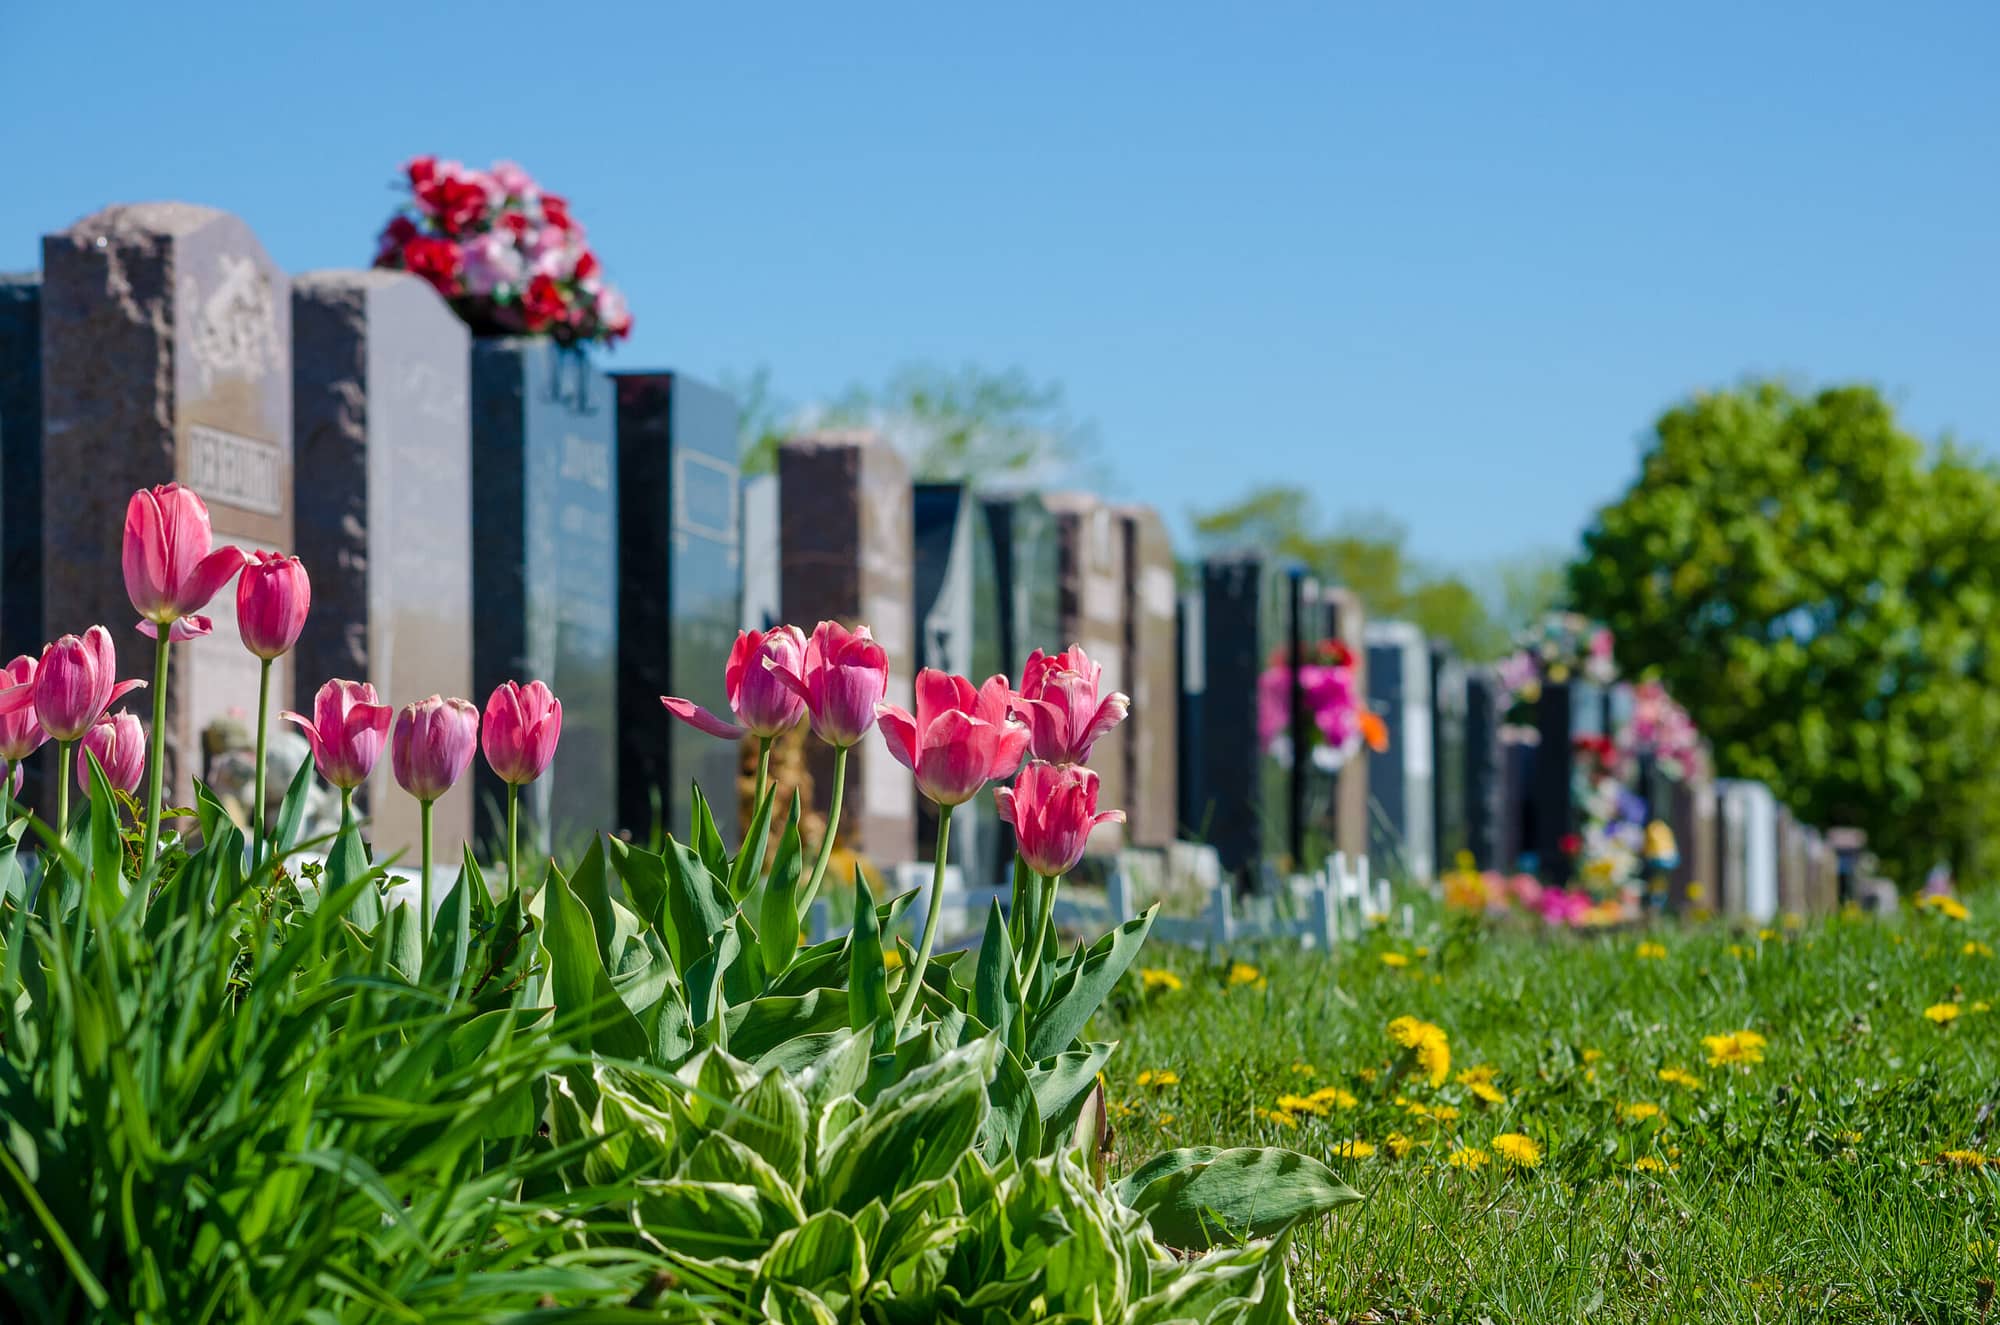 Mesquite Wrongful Death Lawyer. Aligned headstones in a cemetary with pink tulips in the foreground. Grand Prairie Wrongful Death Lawyer